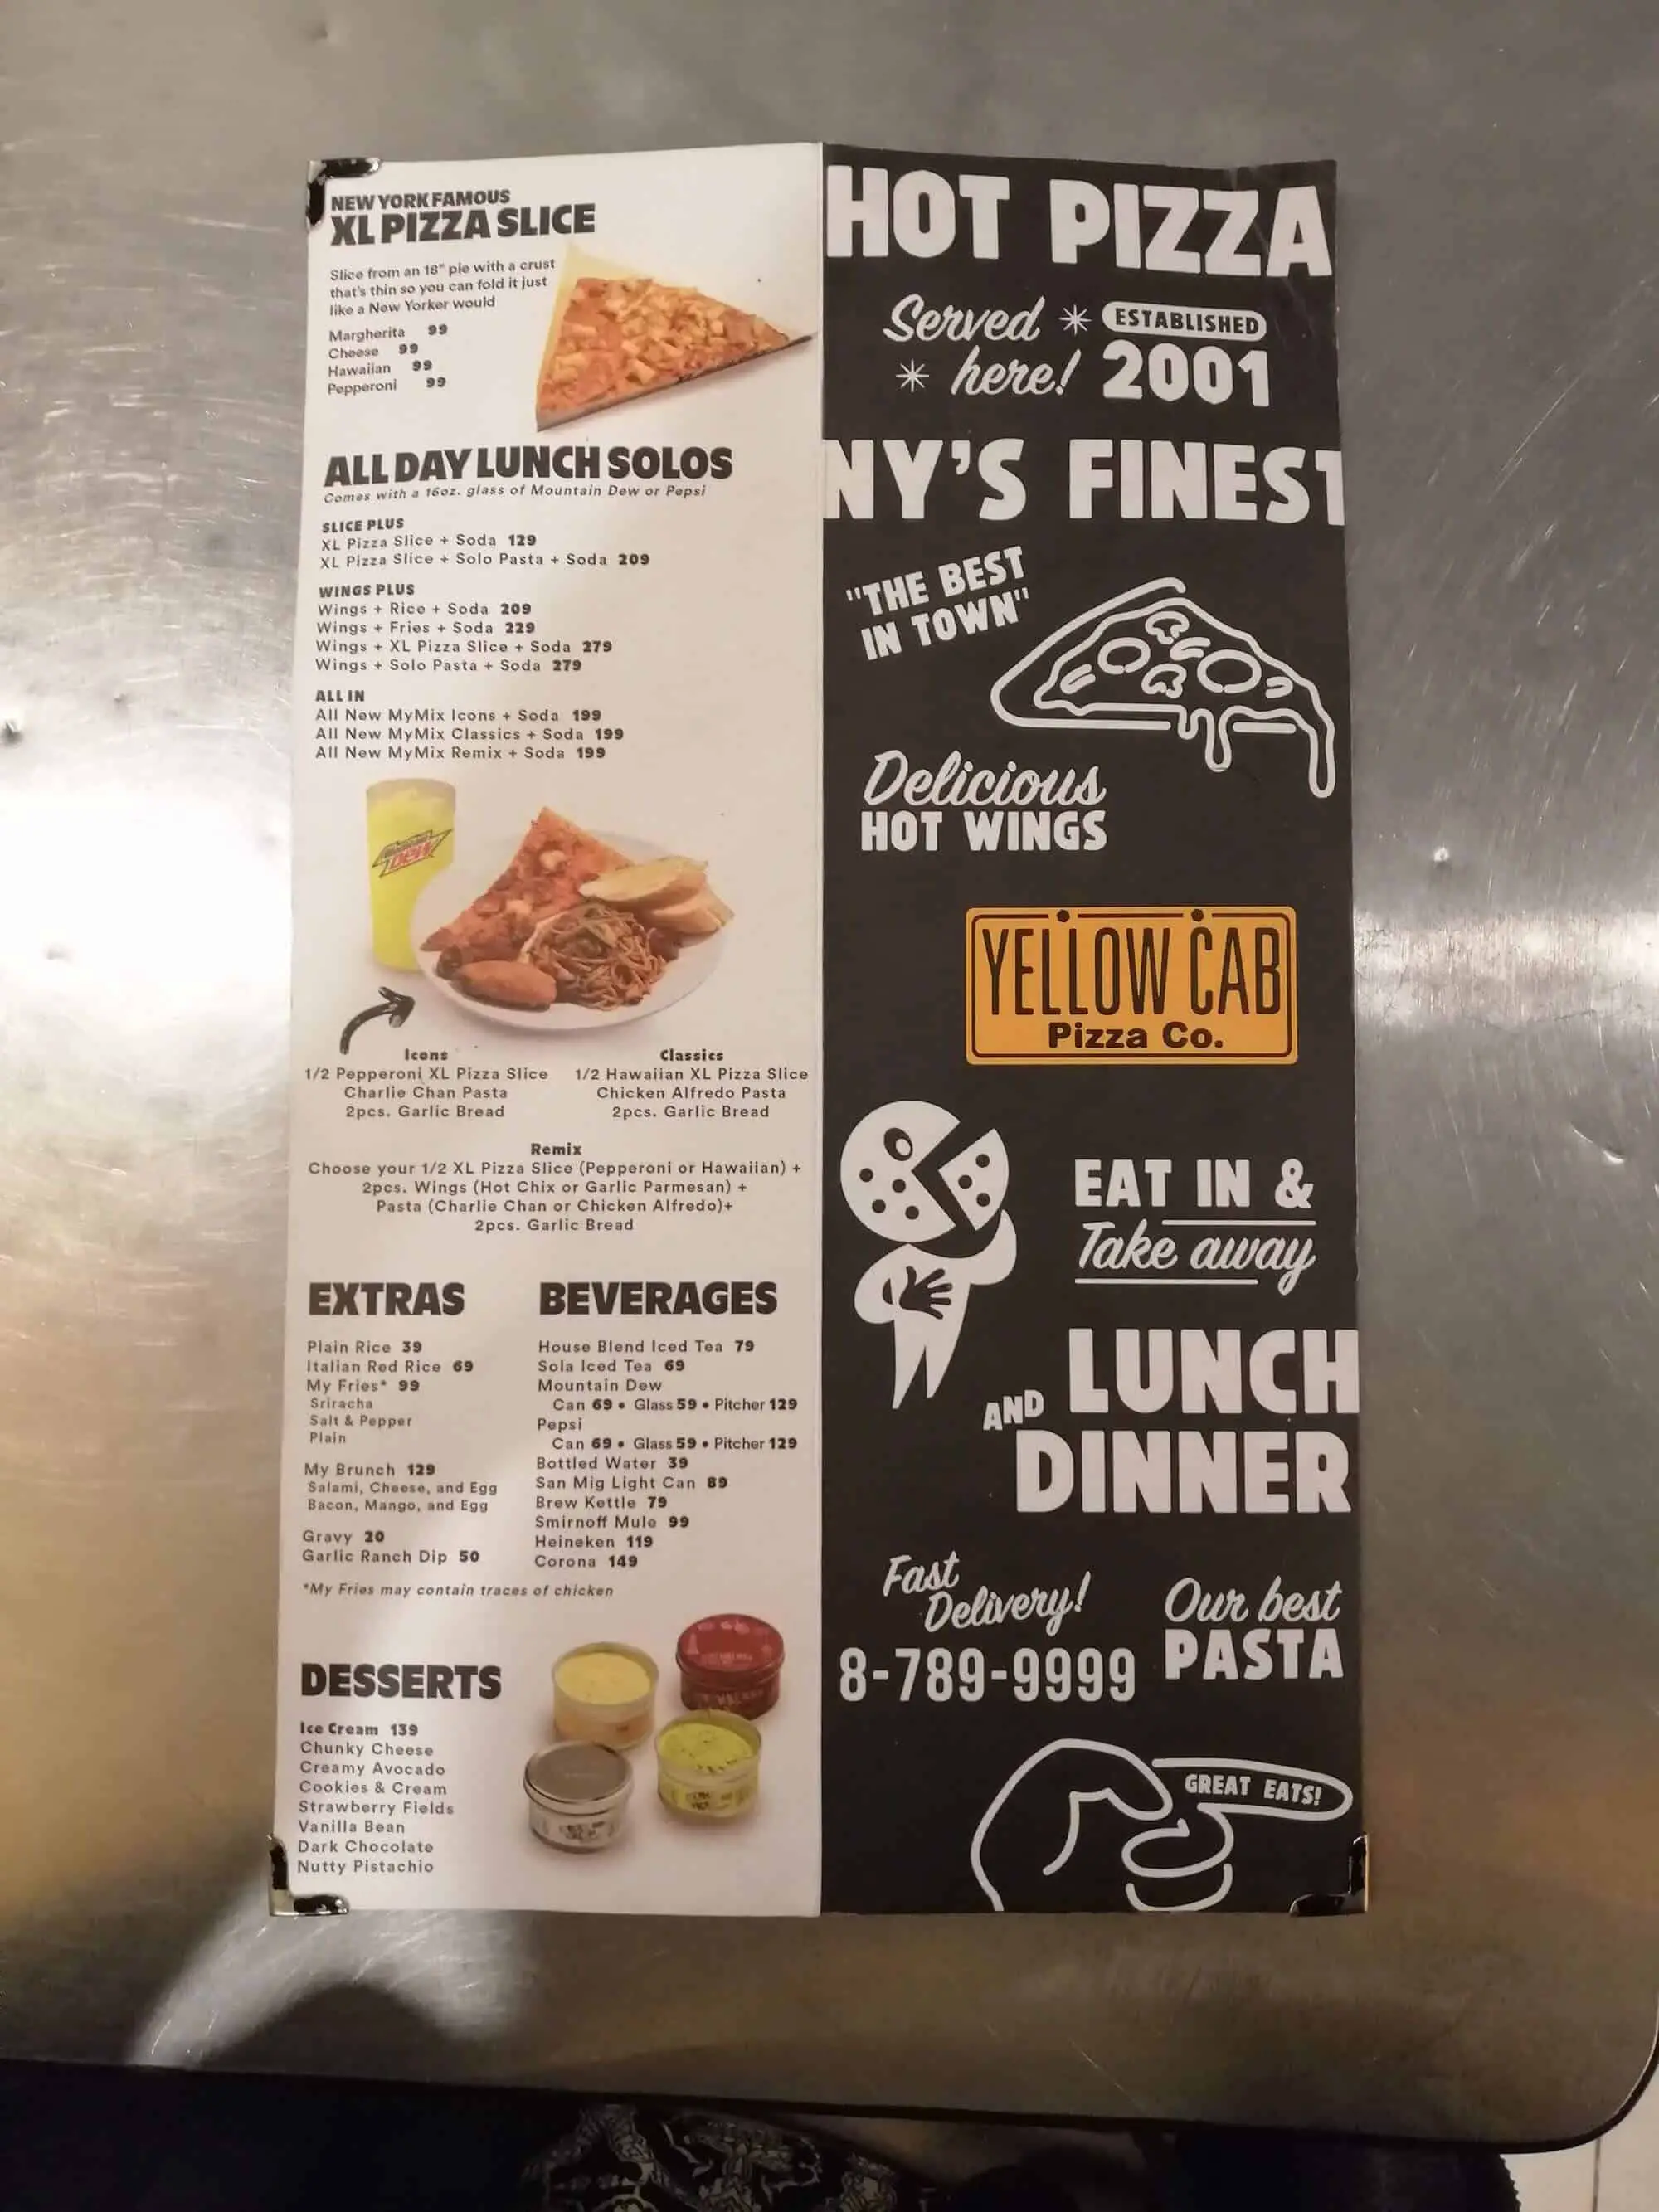 Menu At Yellow Cab Showing Extras, Beverages, And Xl Pizza Slices